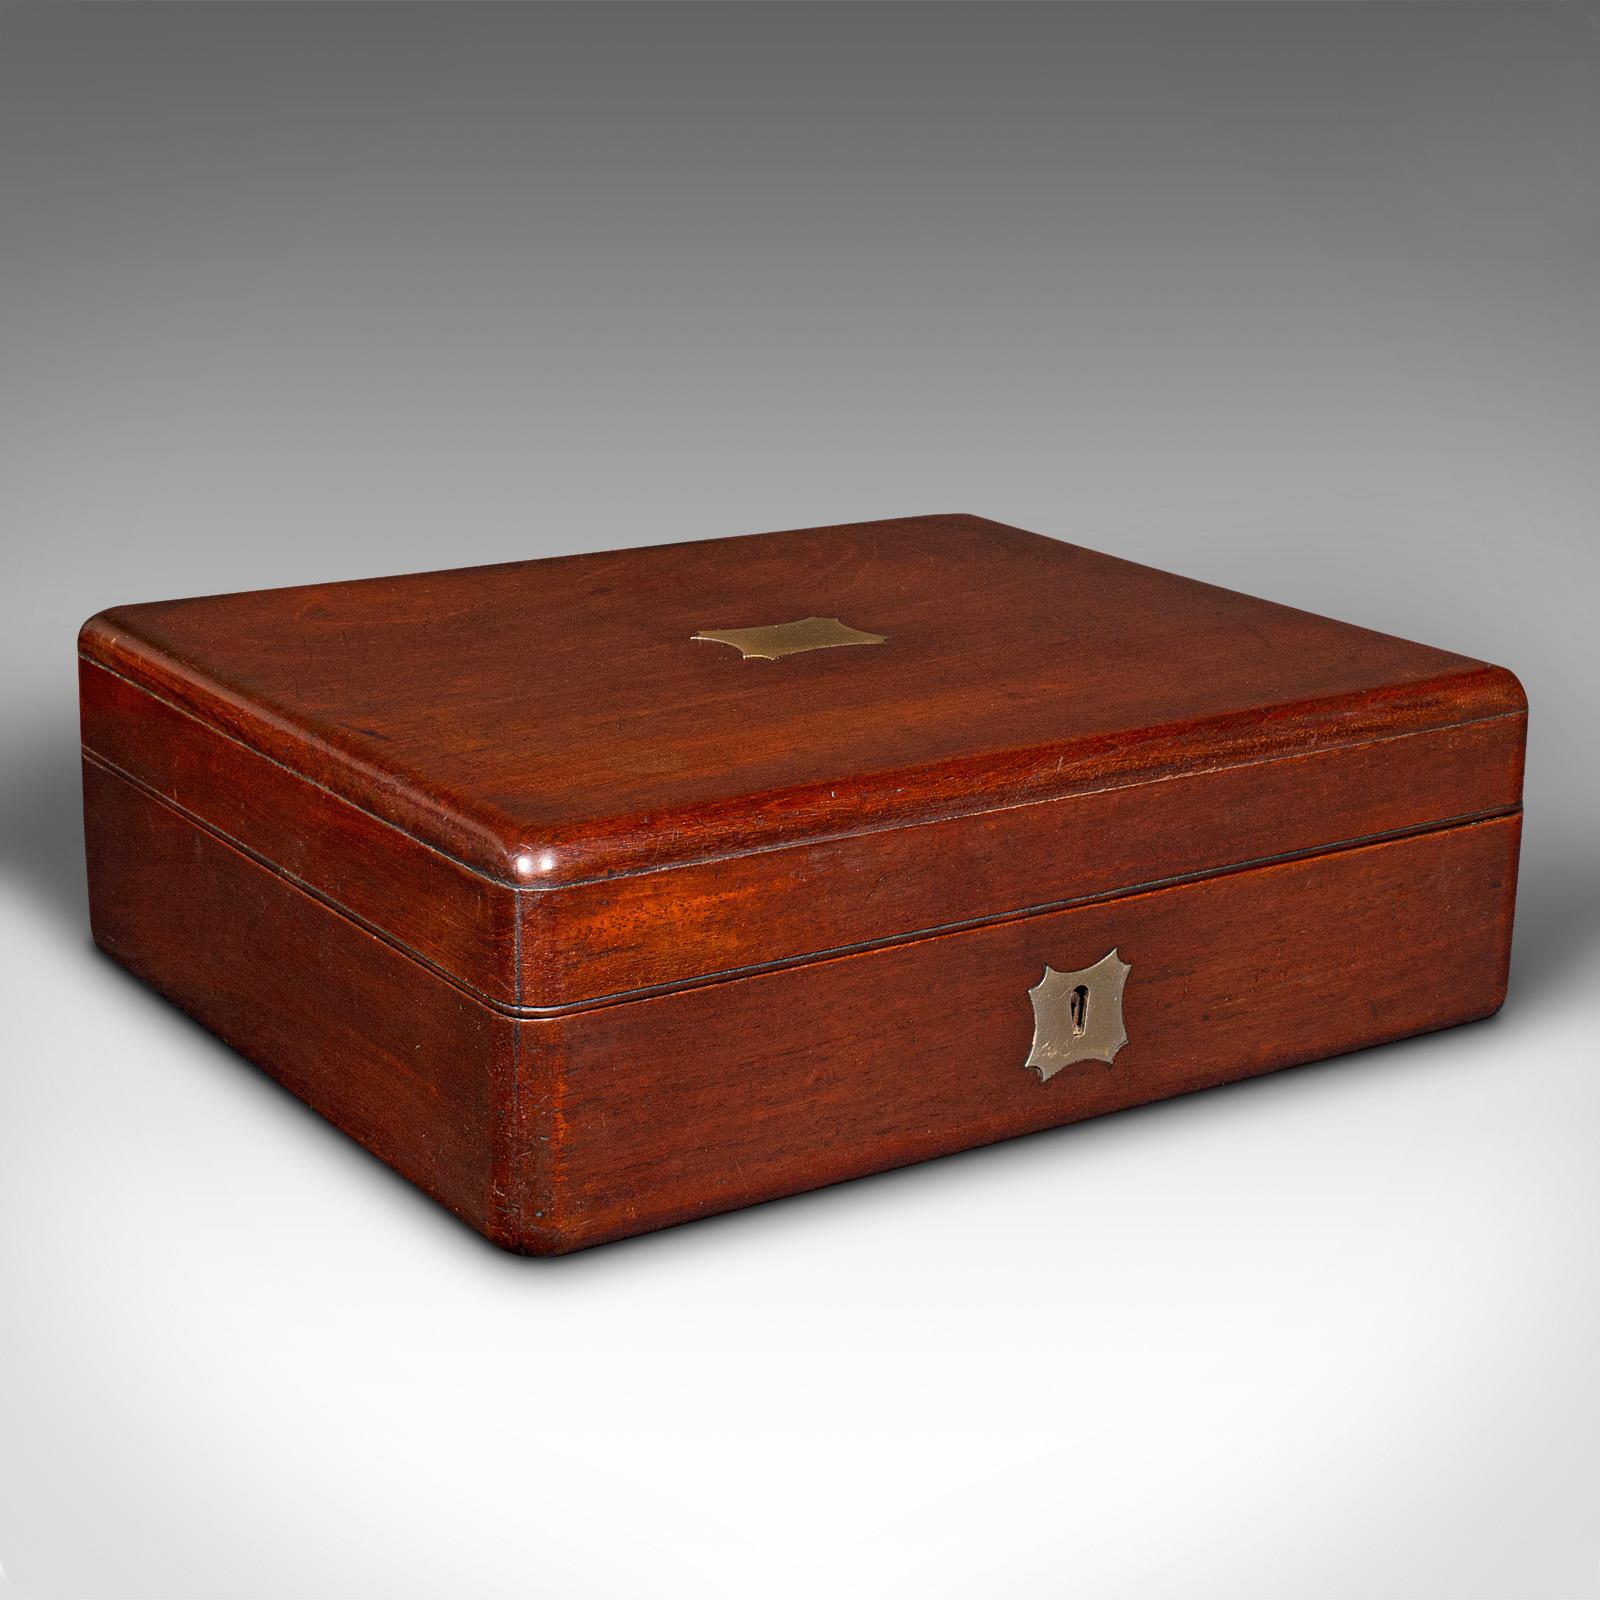 This is a small antique lined jewellery box. An English, mahogany and brass keepsake case, dating to the mid Victorian period, circa 1860.

Tastefully appointed jewellery box with traditional appeal
Displays a desirable aged patina and in good